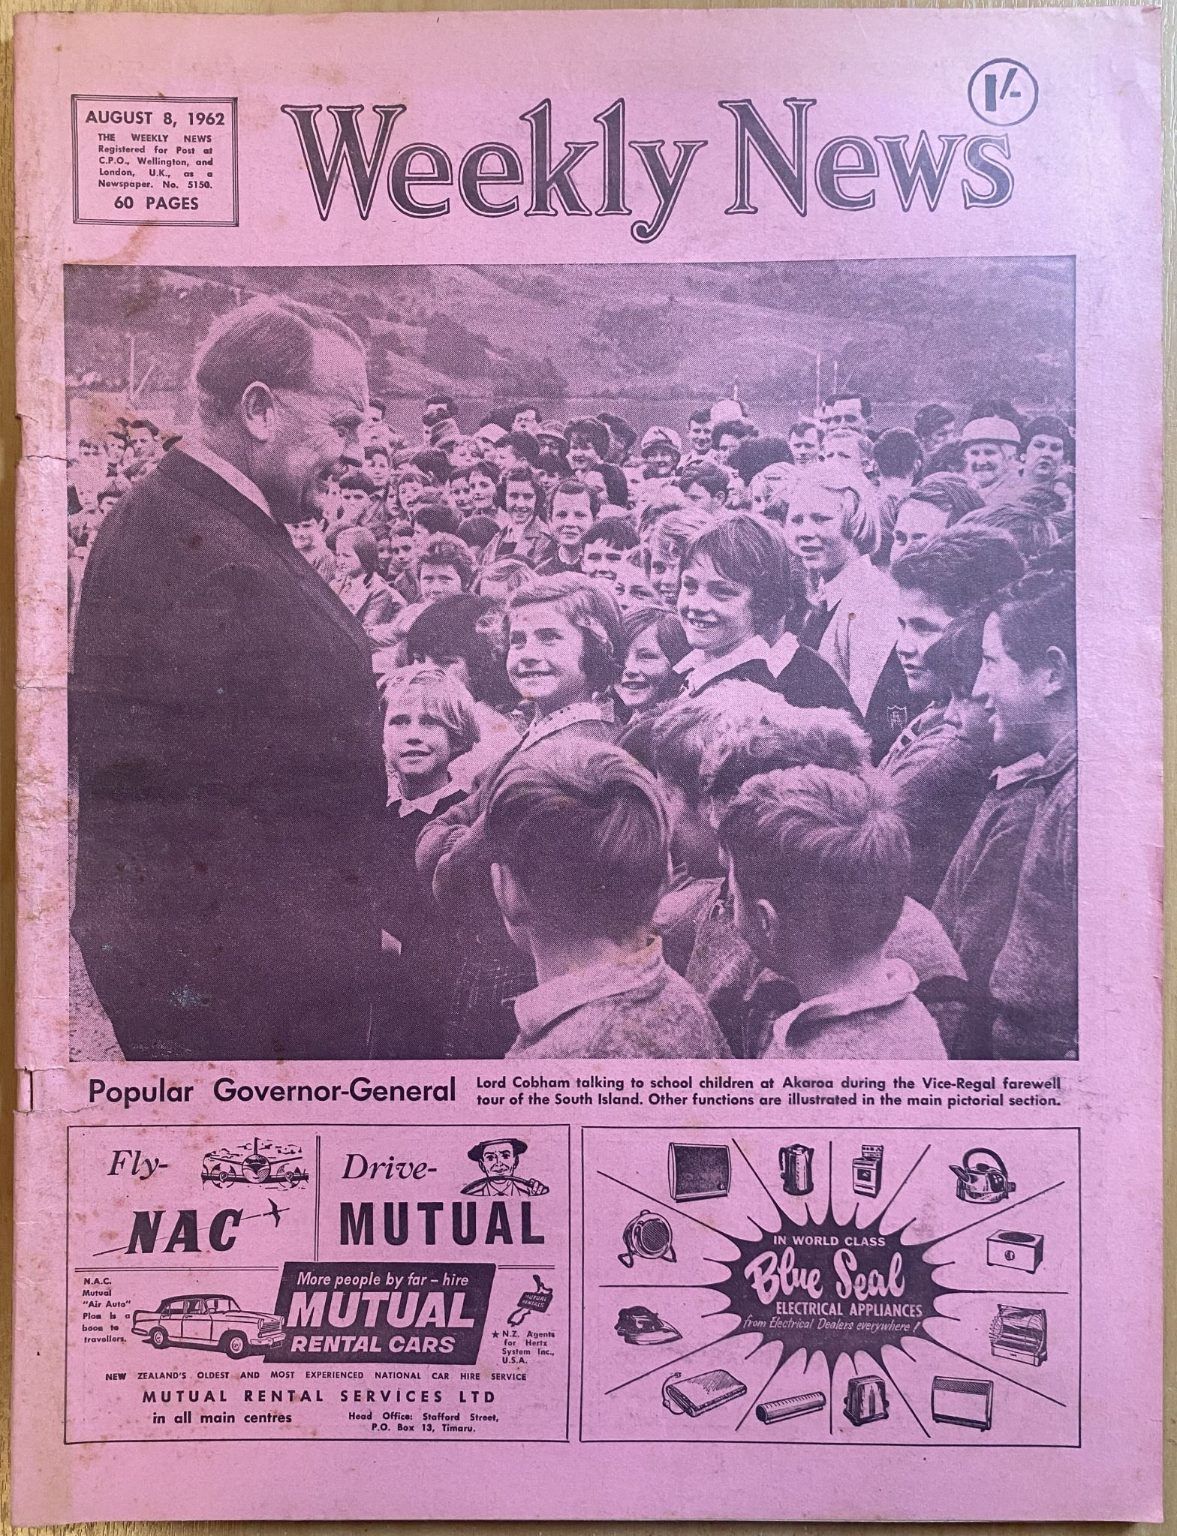 OLD NEWSPAPER: The Weekly News, No. 5150, 8 August 1962